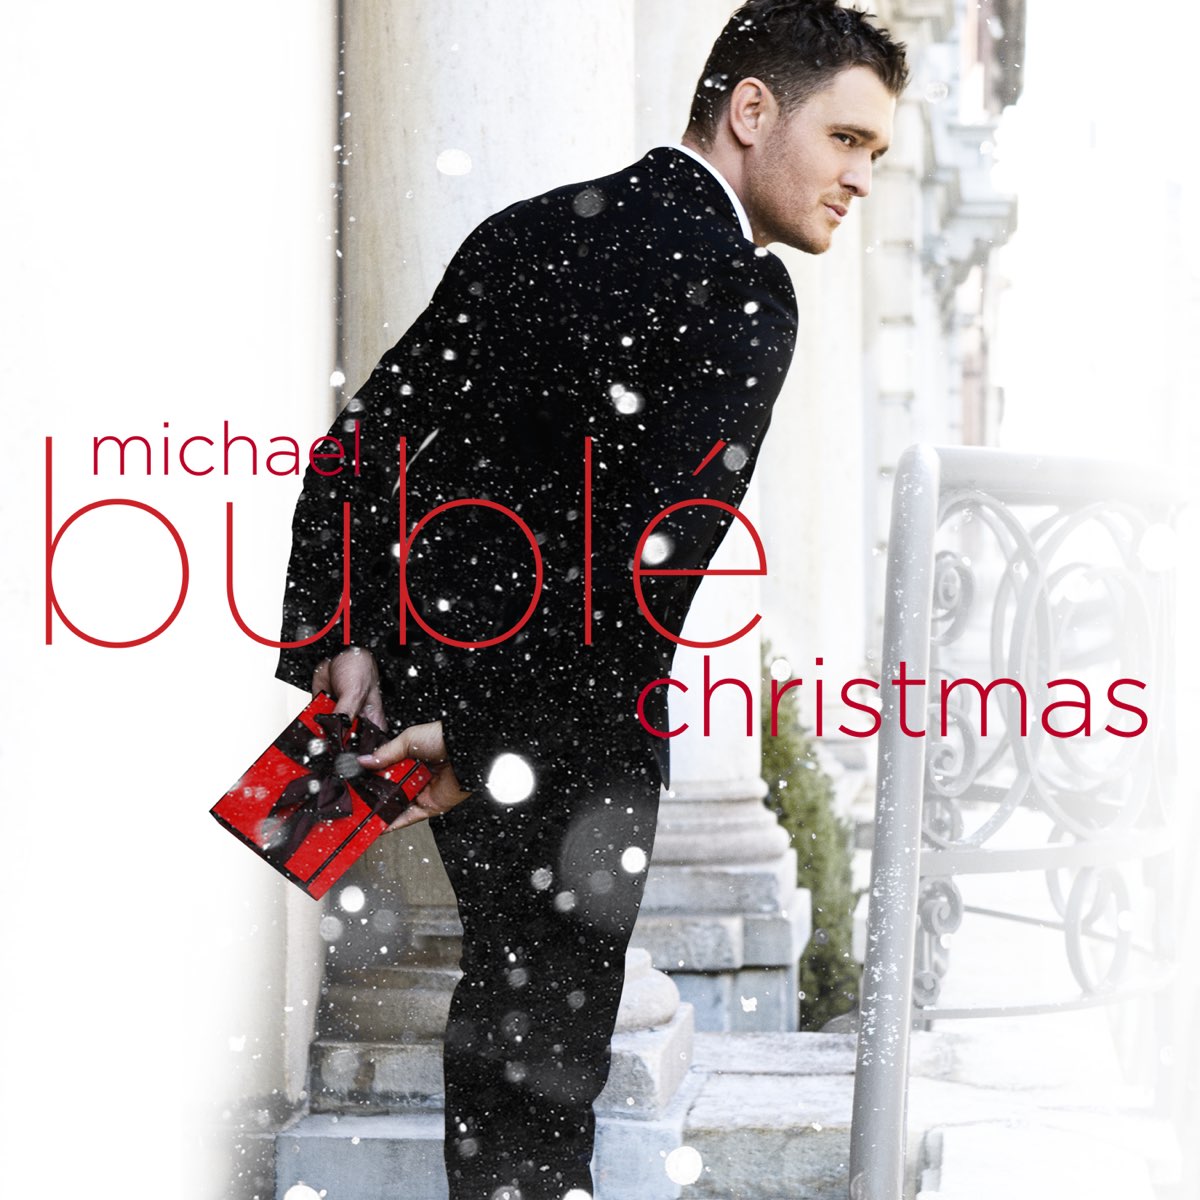 Christmas (Deluxe 10th Anniversary Edition) – Michael Bublé